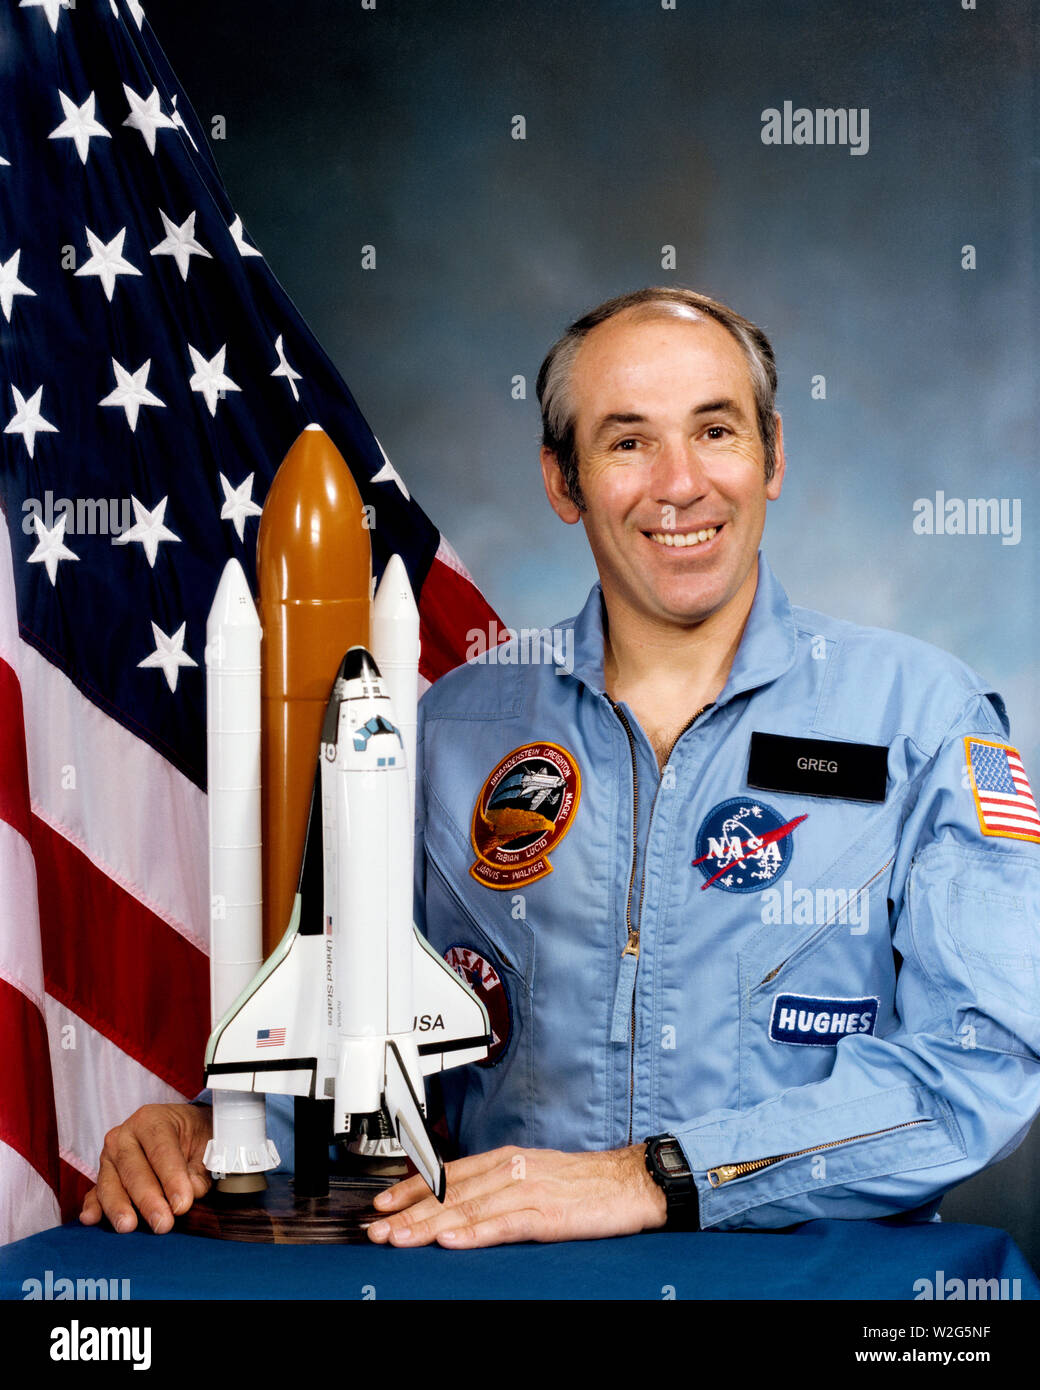 (1985) --- Astronaut Gregory B. Jarvis, payload specialist (NOTE: Jarvis died in the STS-51L space shuttle Challenger explosion, on Jan. 28, 1986.) Stock Photo